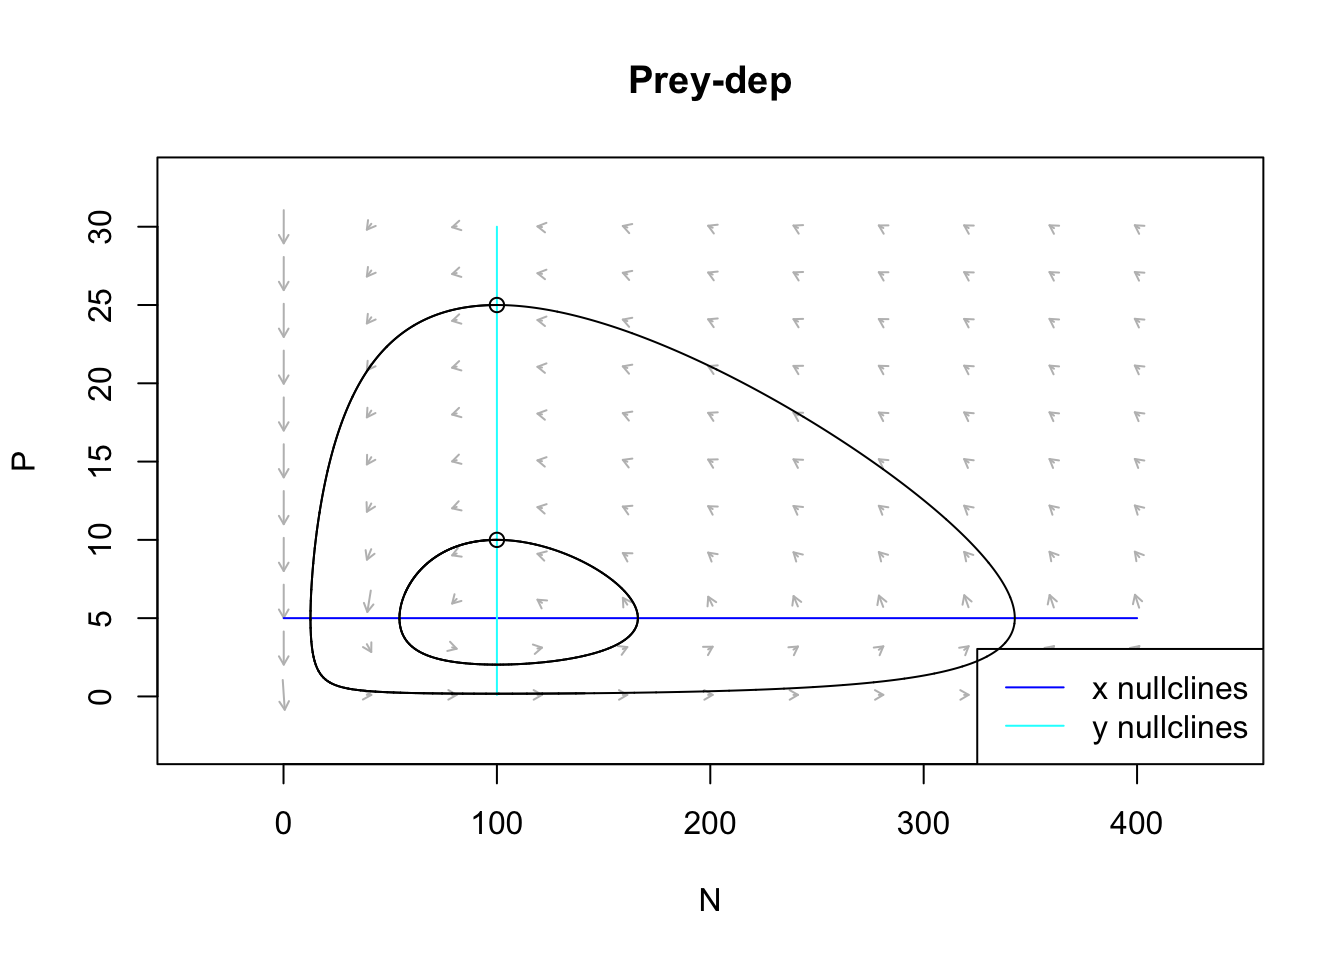 The prey and predator isoclines under prey dependence. Arrows indicate the direction of changing population sizes. The black lines are two different tractories based on two different initial abundances. The 'nullclines' are the zero net growth isoclines for the prey (x) and the predator (y). Based on the arrow heads, we can see that the trajectories oscillate in a counterclockwise direction.